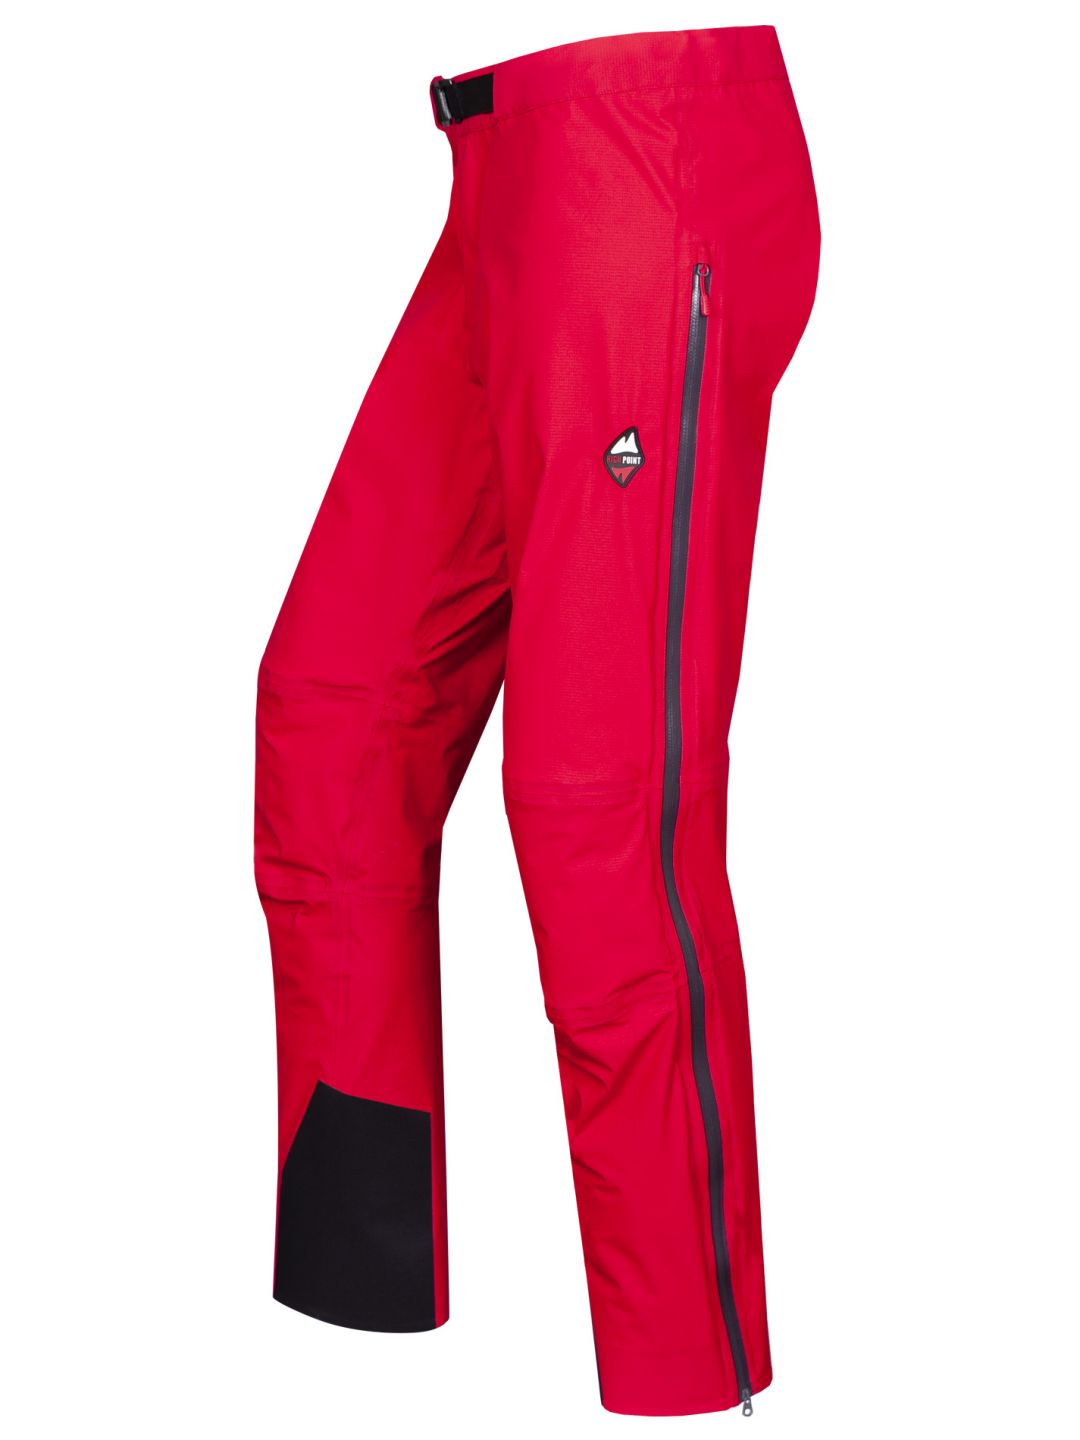 HIGH POINT CLIFF pants red varianta: S